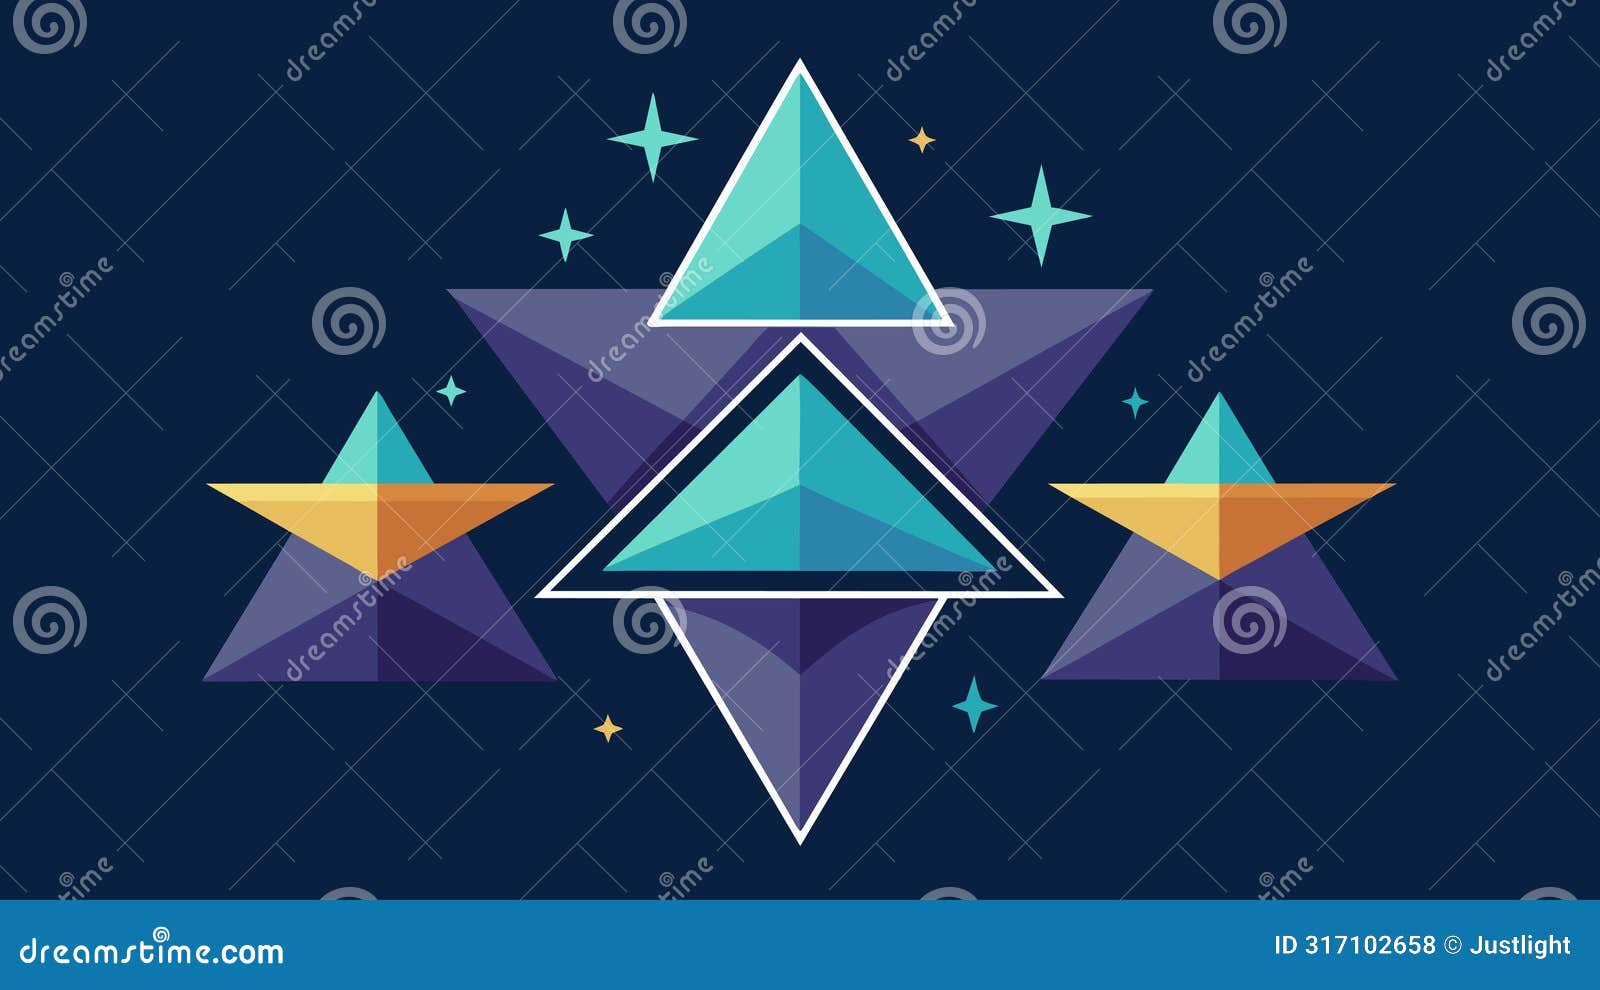 the alignment of stars in the  of a triangle representing the three disciplines of stoicism logic ethics and